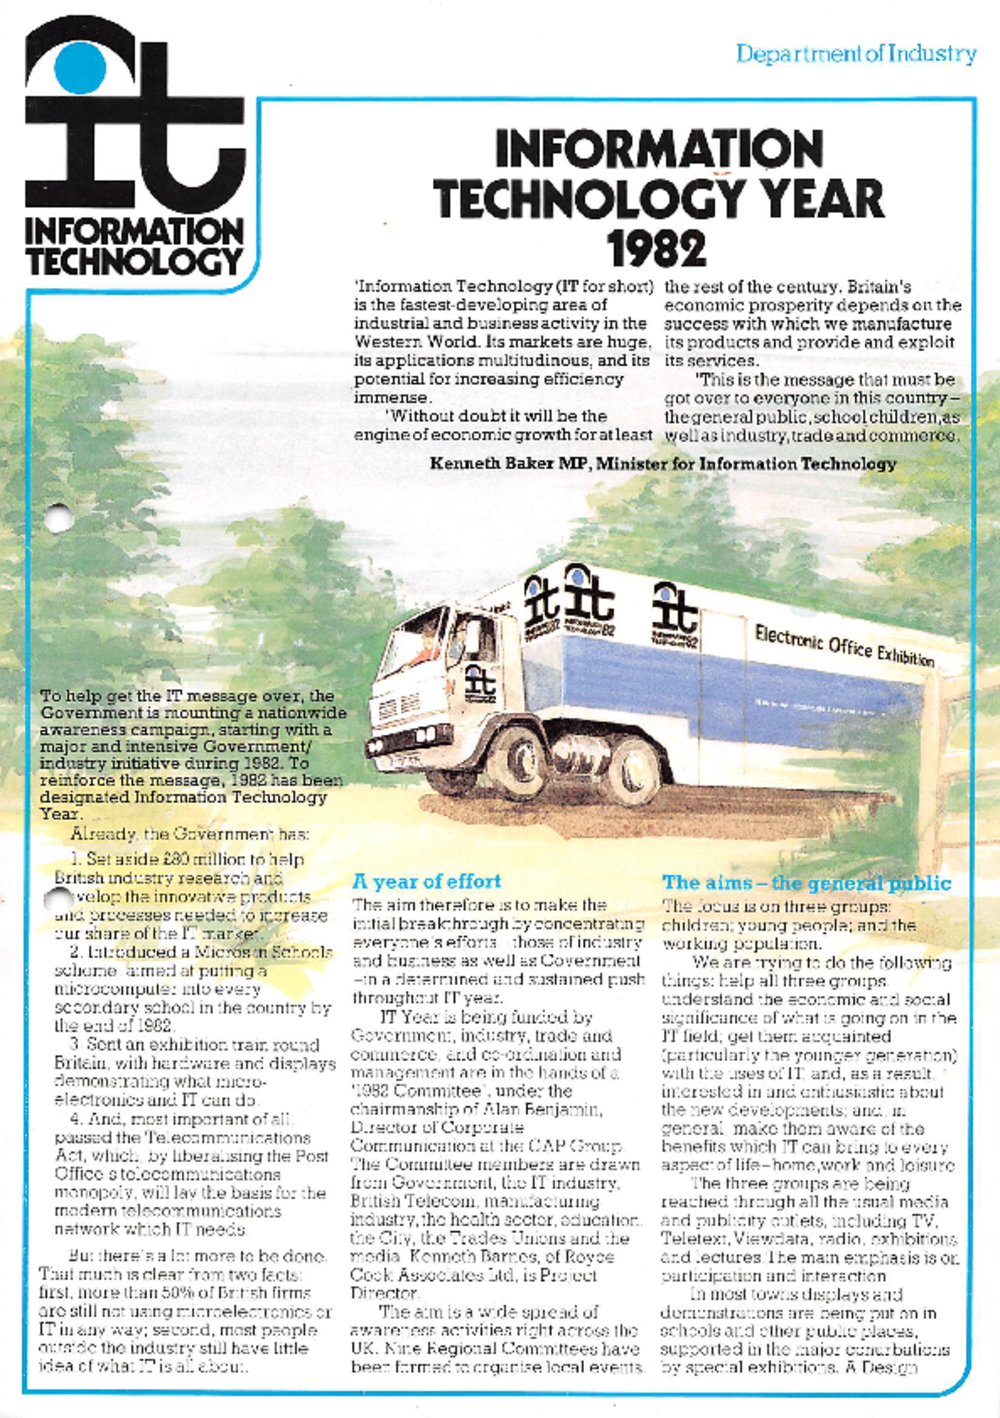 Article: Information Technology Year 1982